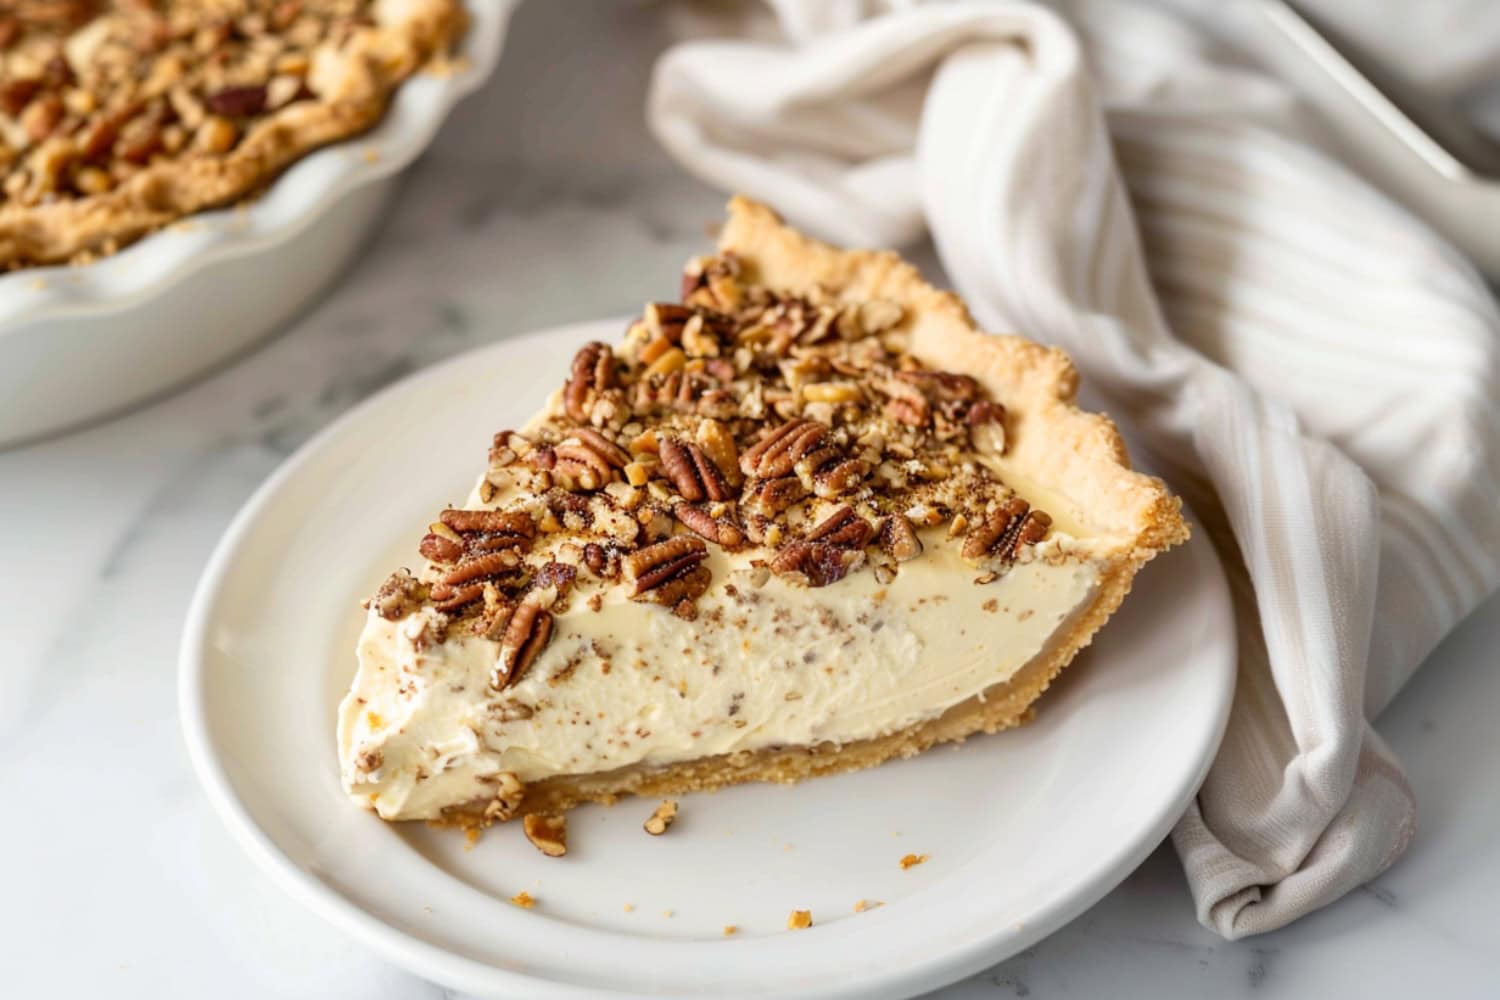 Rich pecan cream pie, featuring a smooth and creamy filling topped with crushed nuts